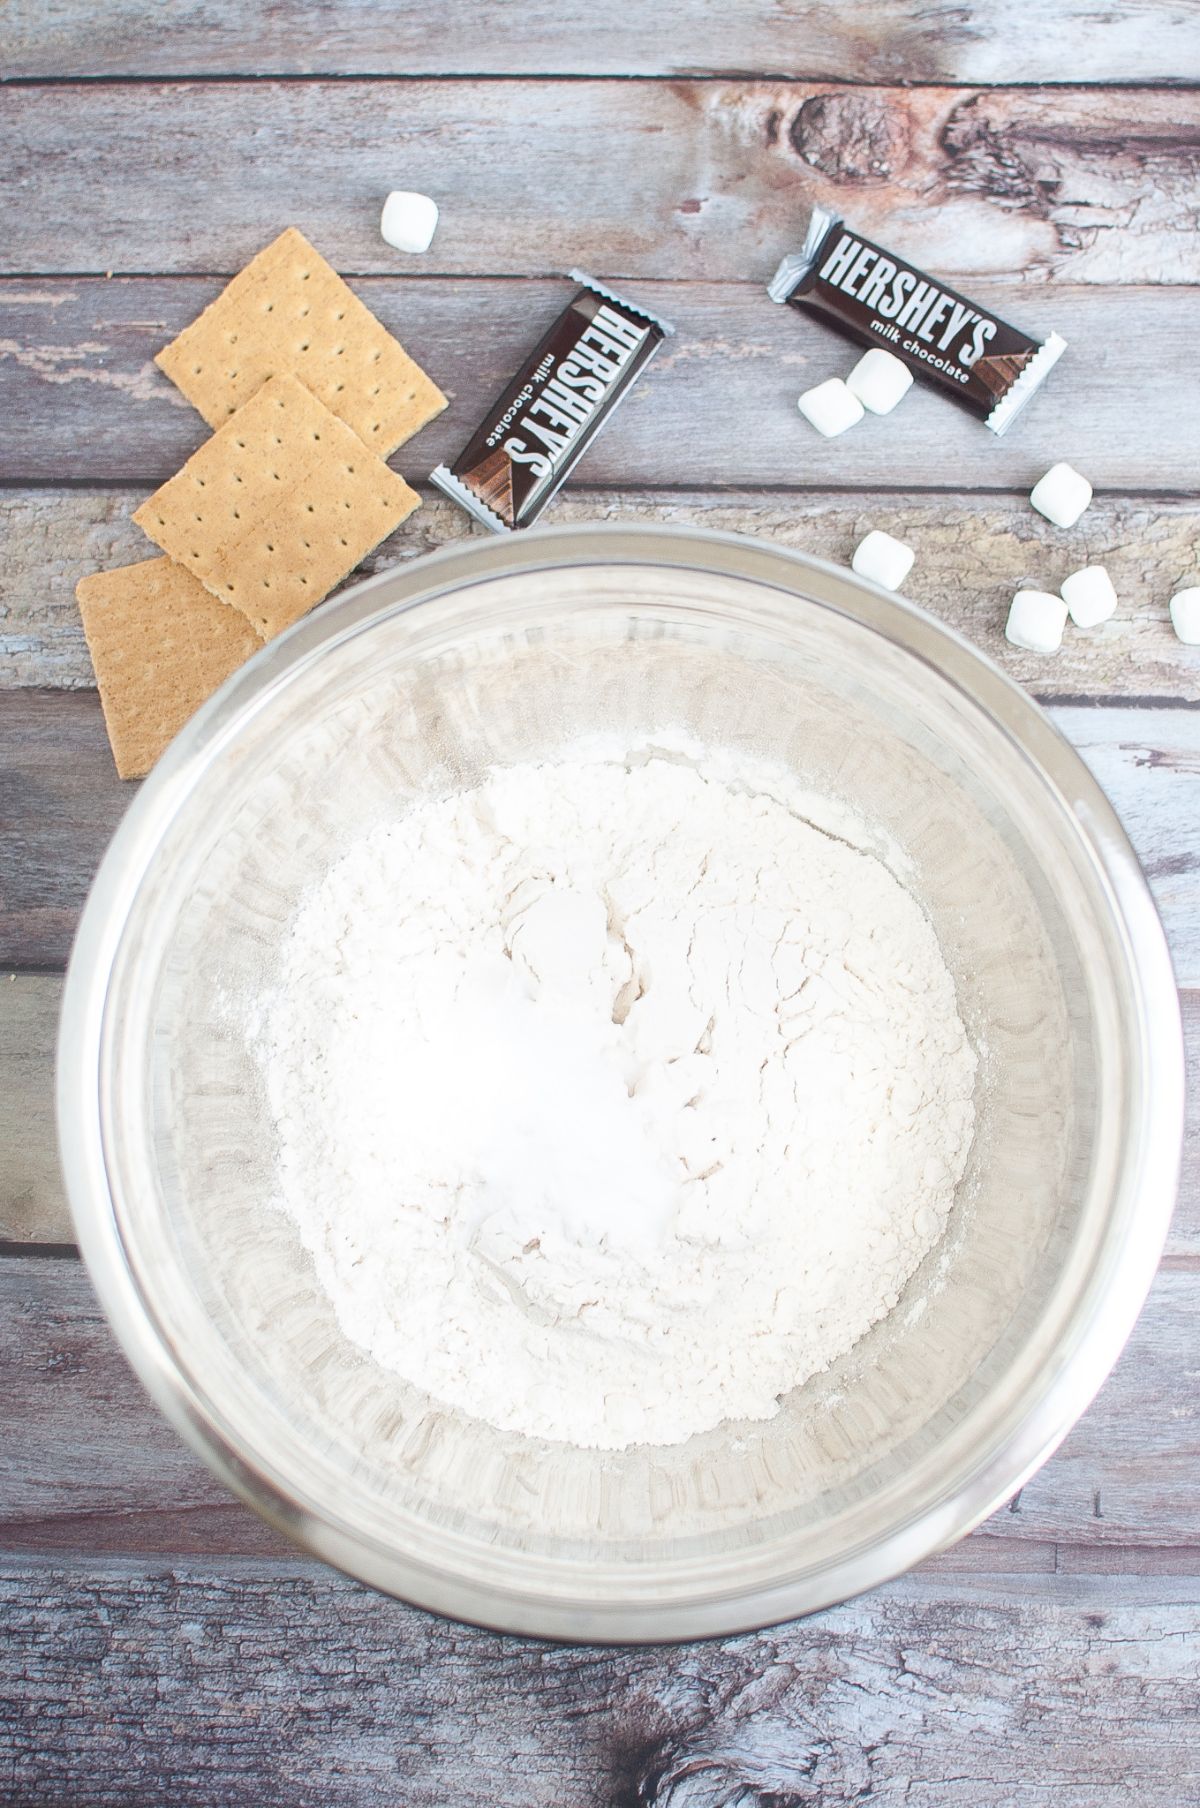 salt, baking powder, cornstarch, and flour in a separate bowl next to graham crackers, Hershey;s chocolate bars, and marshmallows